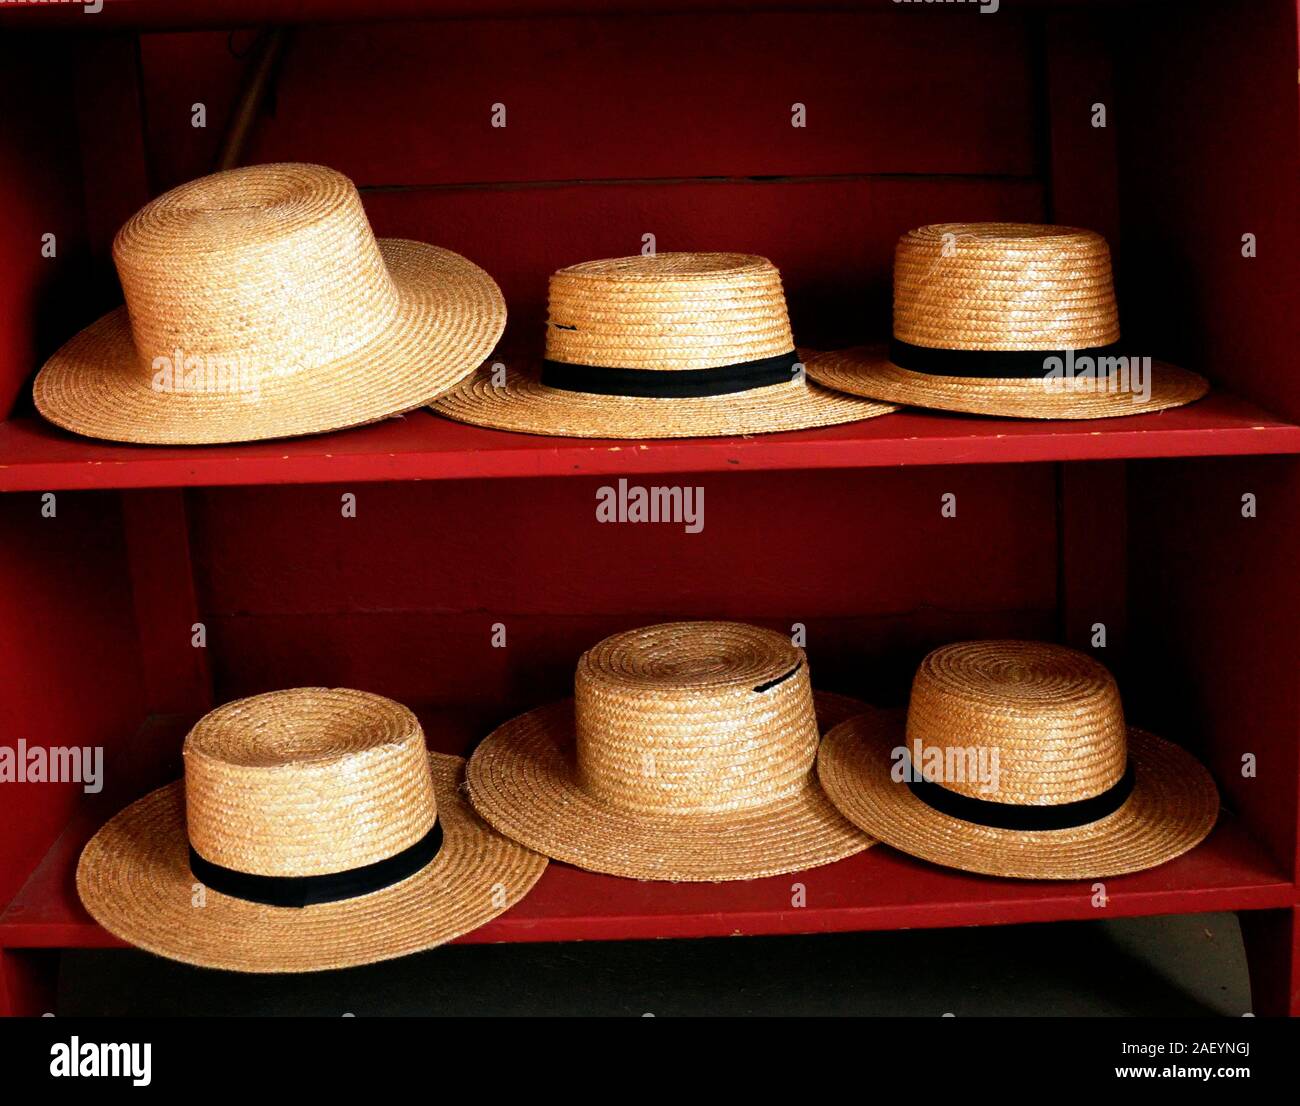 A collection of Amish straw hats Stock Photo